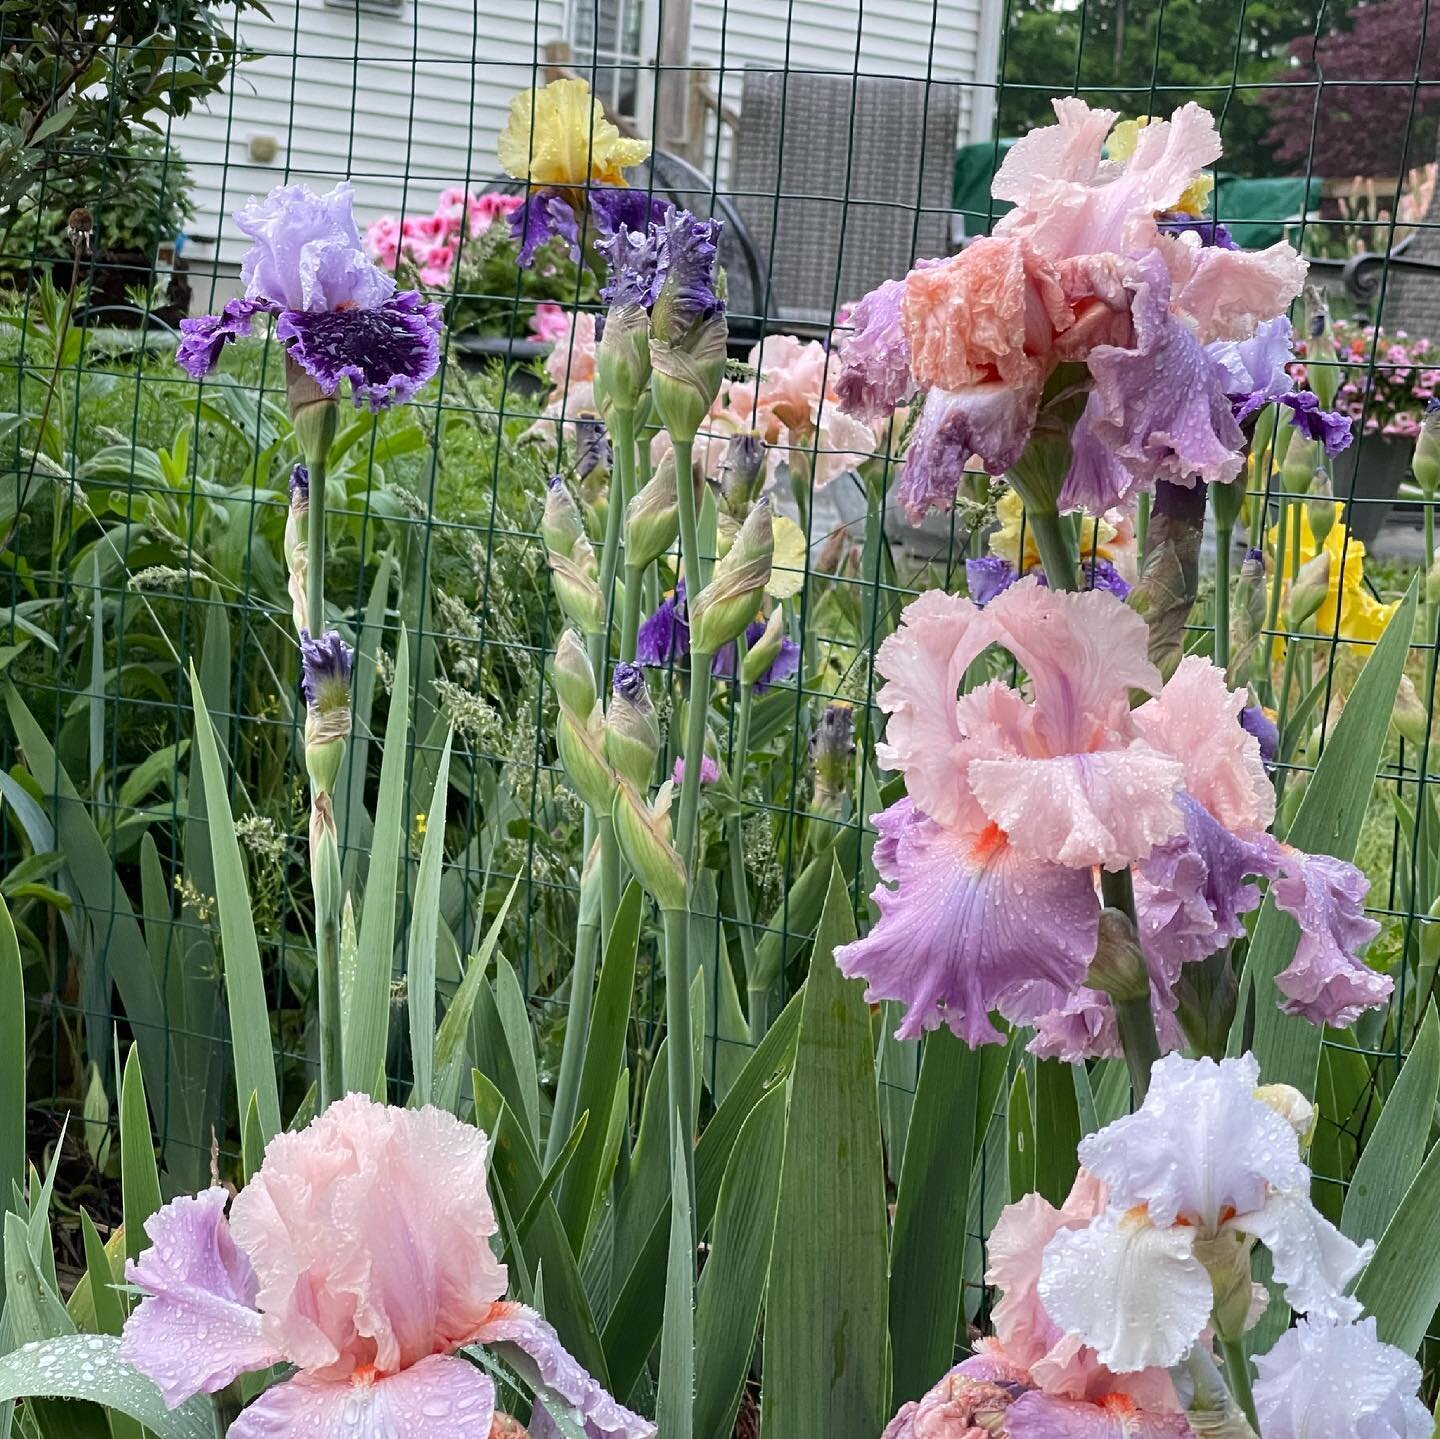 I am overwhelmed this morning with what happened over-night in the garden.  The iris have all bloomed at once and I am amazed with the beauty of it all.  The pictures barely do it justice.  The beauty and incredible detail in God's creativity makes m